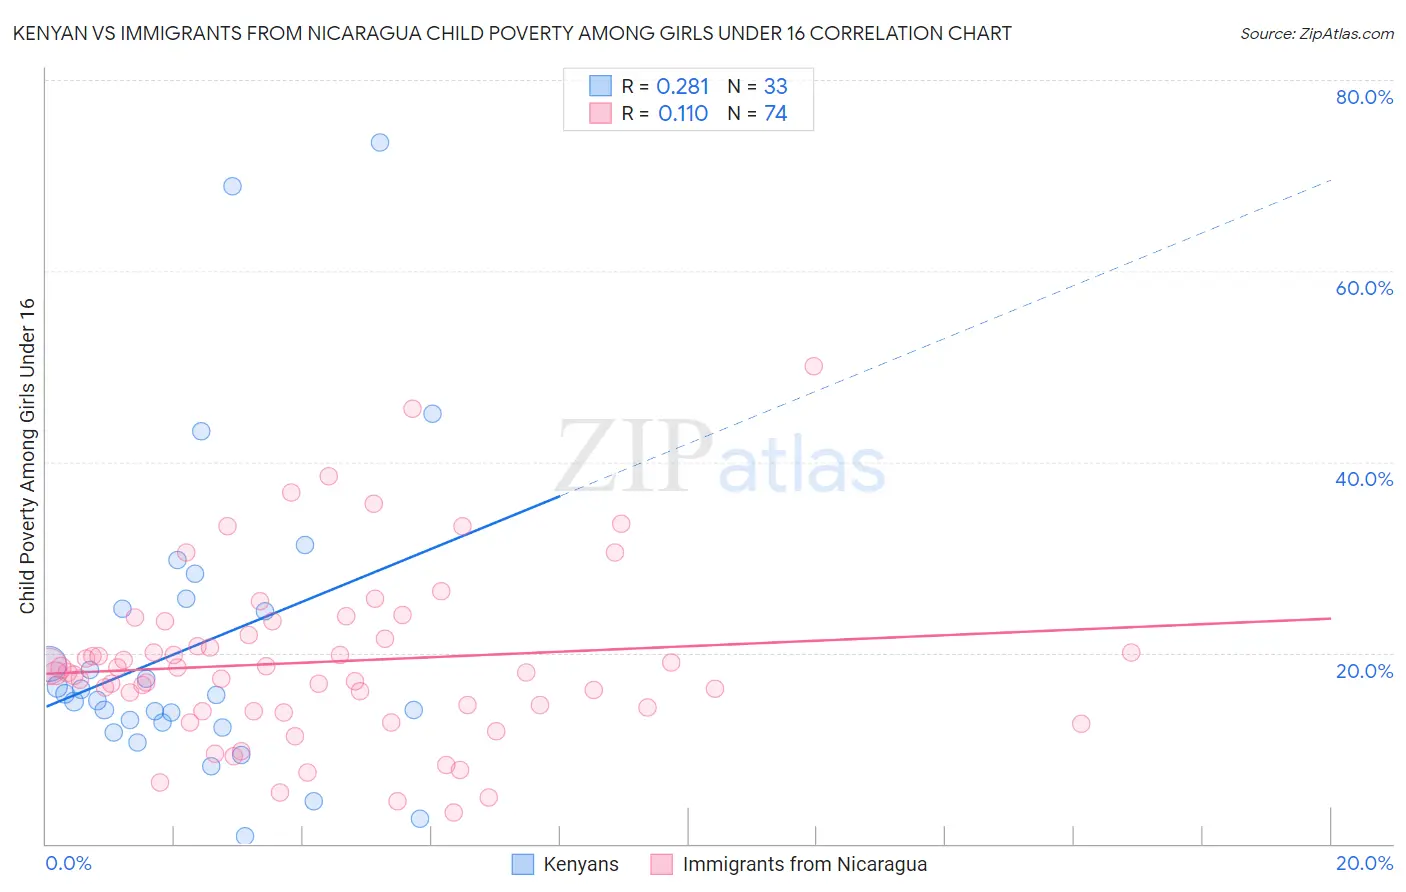 Kenyan vs Immigrants from Nicaragua Child Poverty Among Girls Under 16